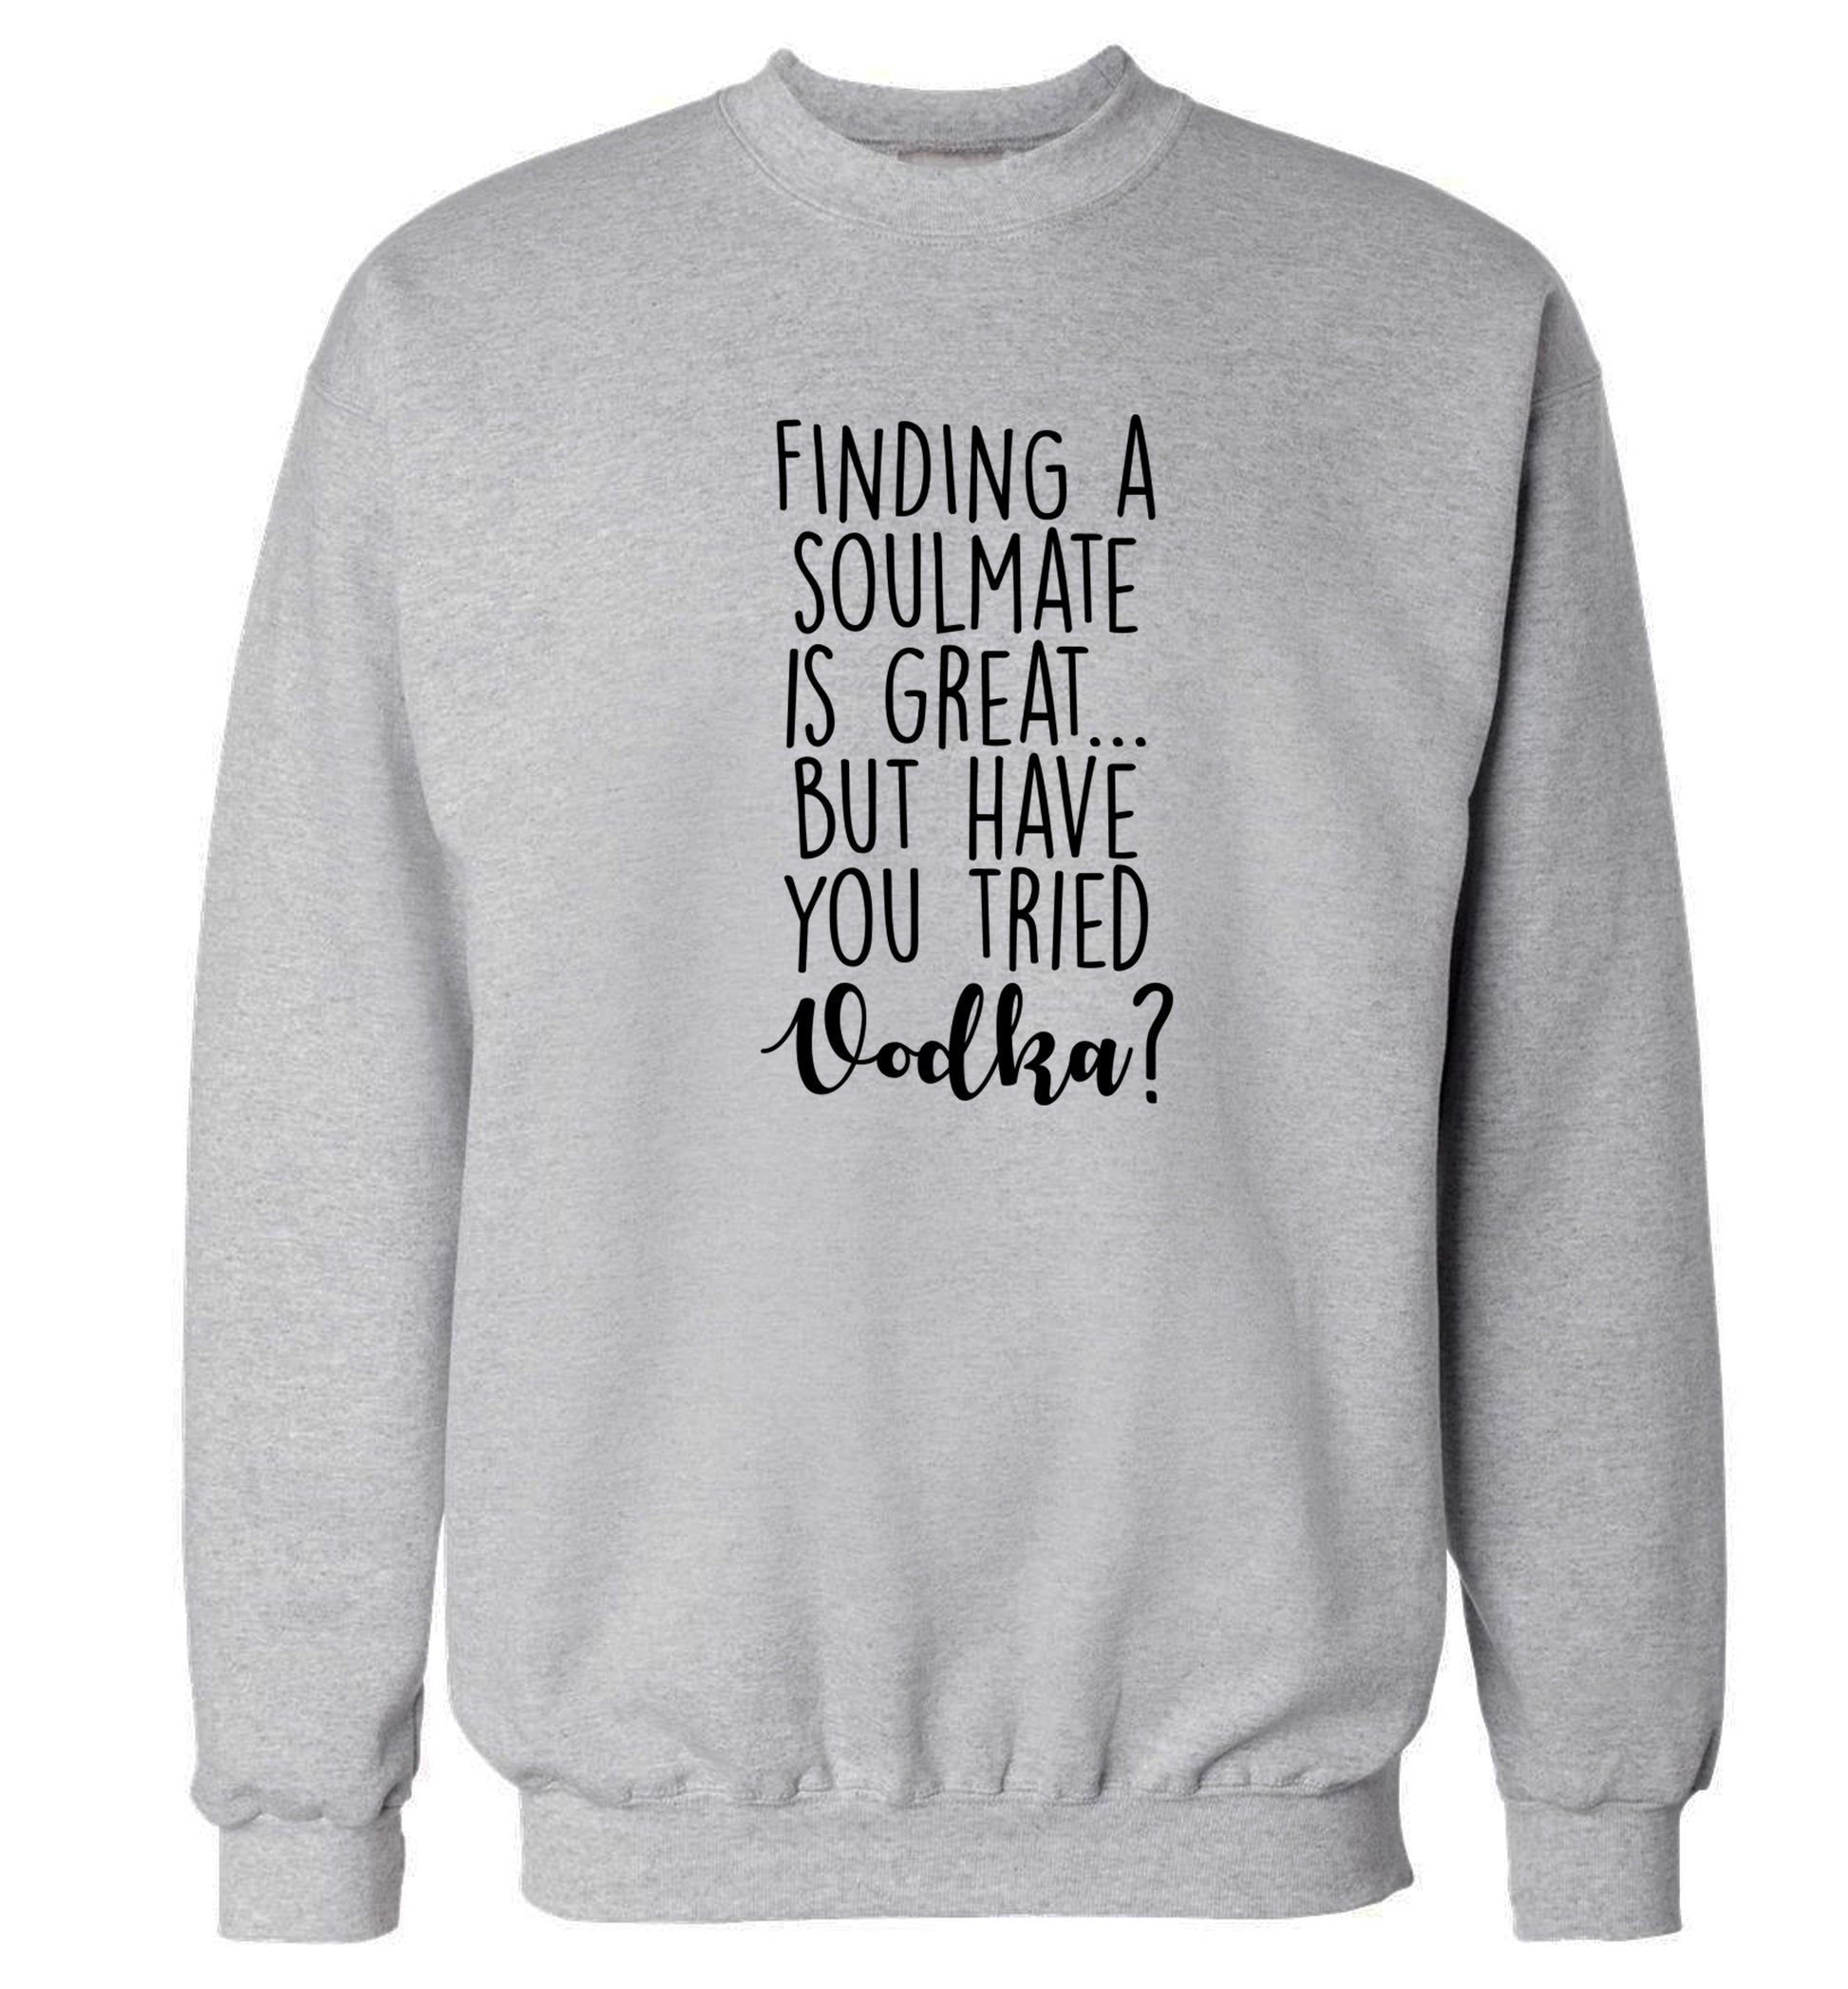 Finding a soulmate is great but have you tried vodka? Adult's unisex grey Sweater 2XL